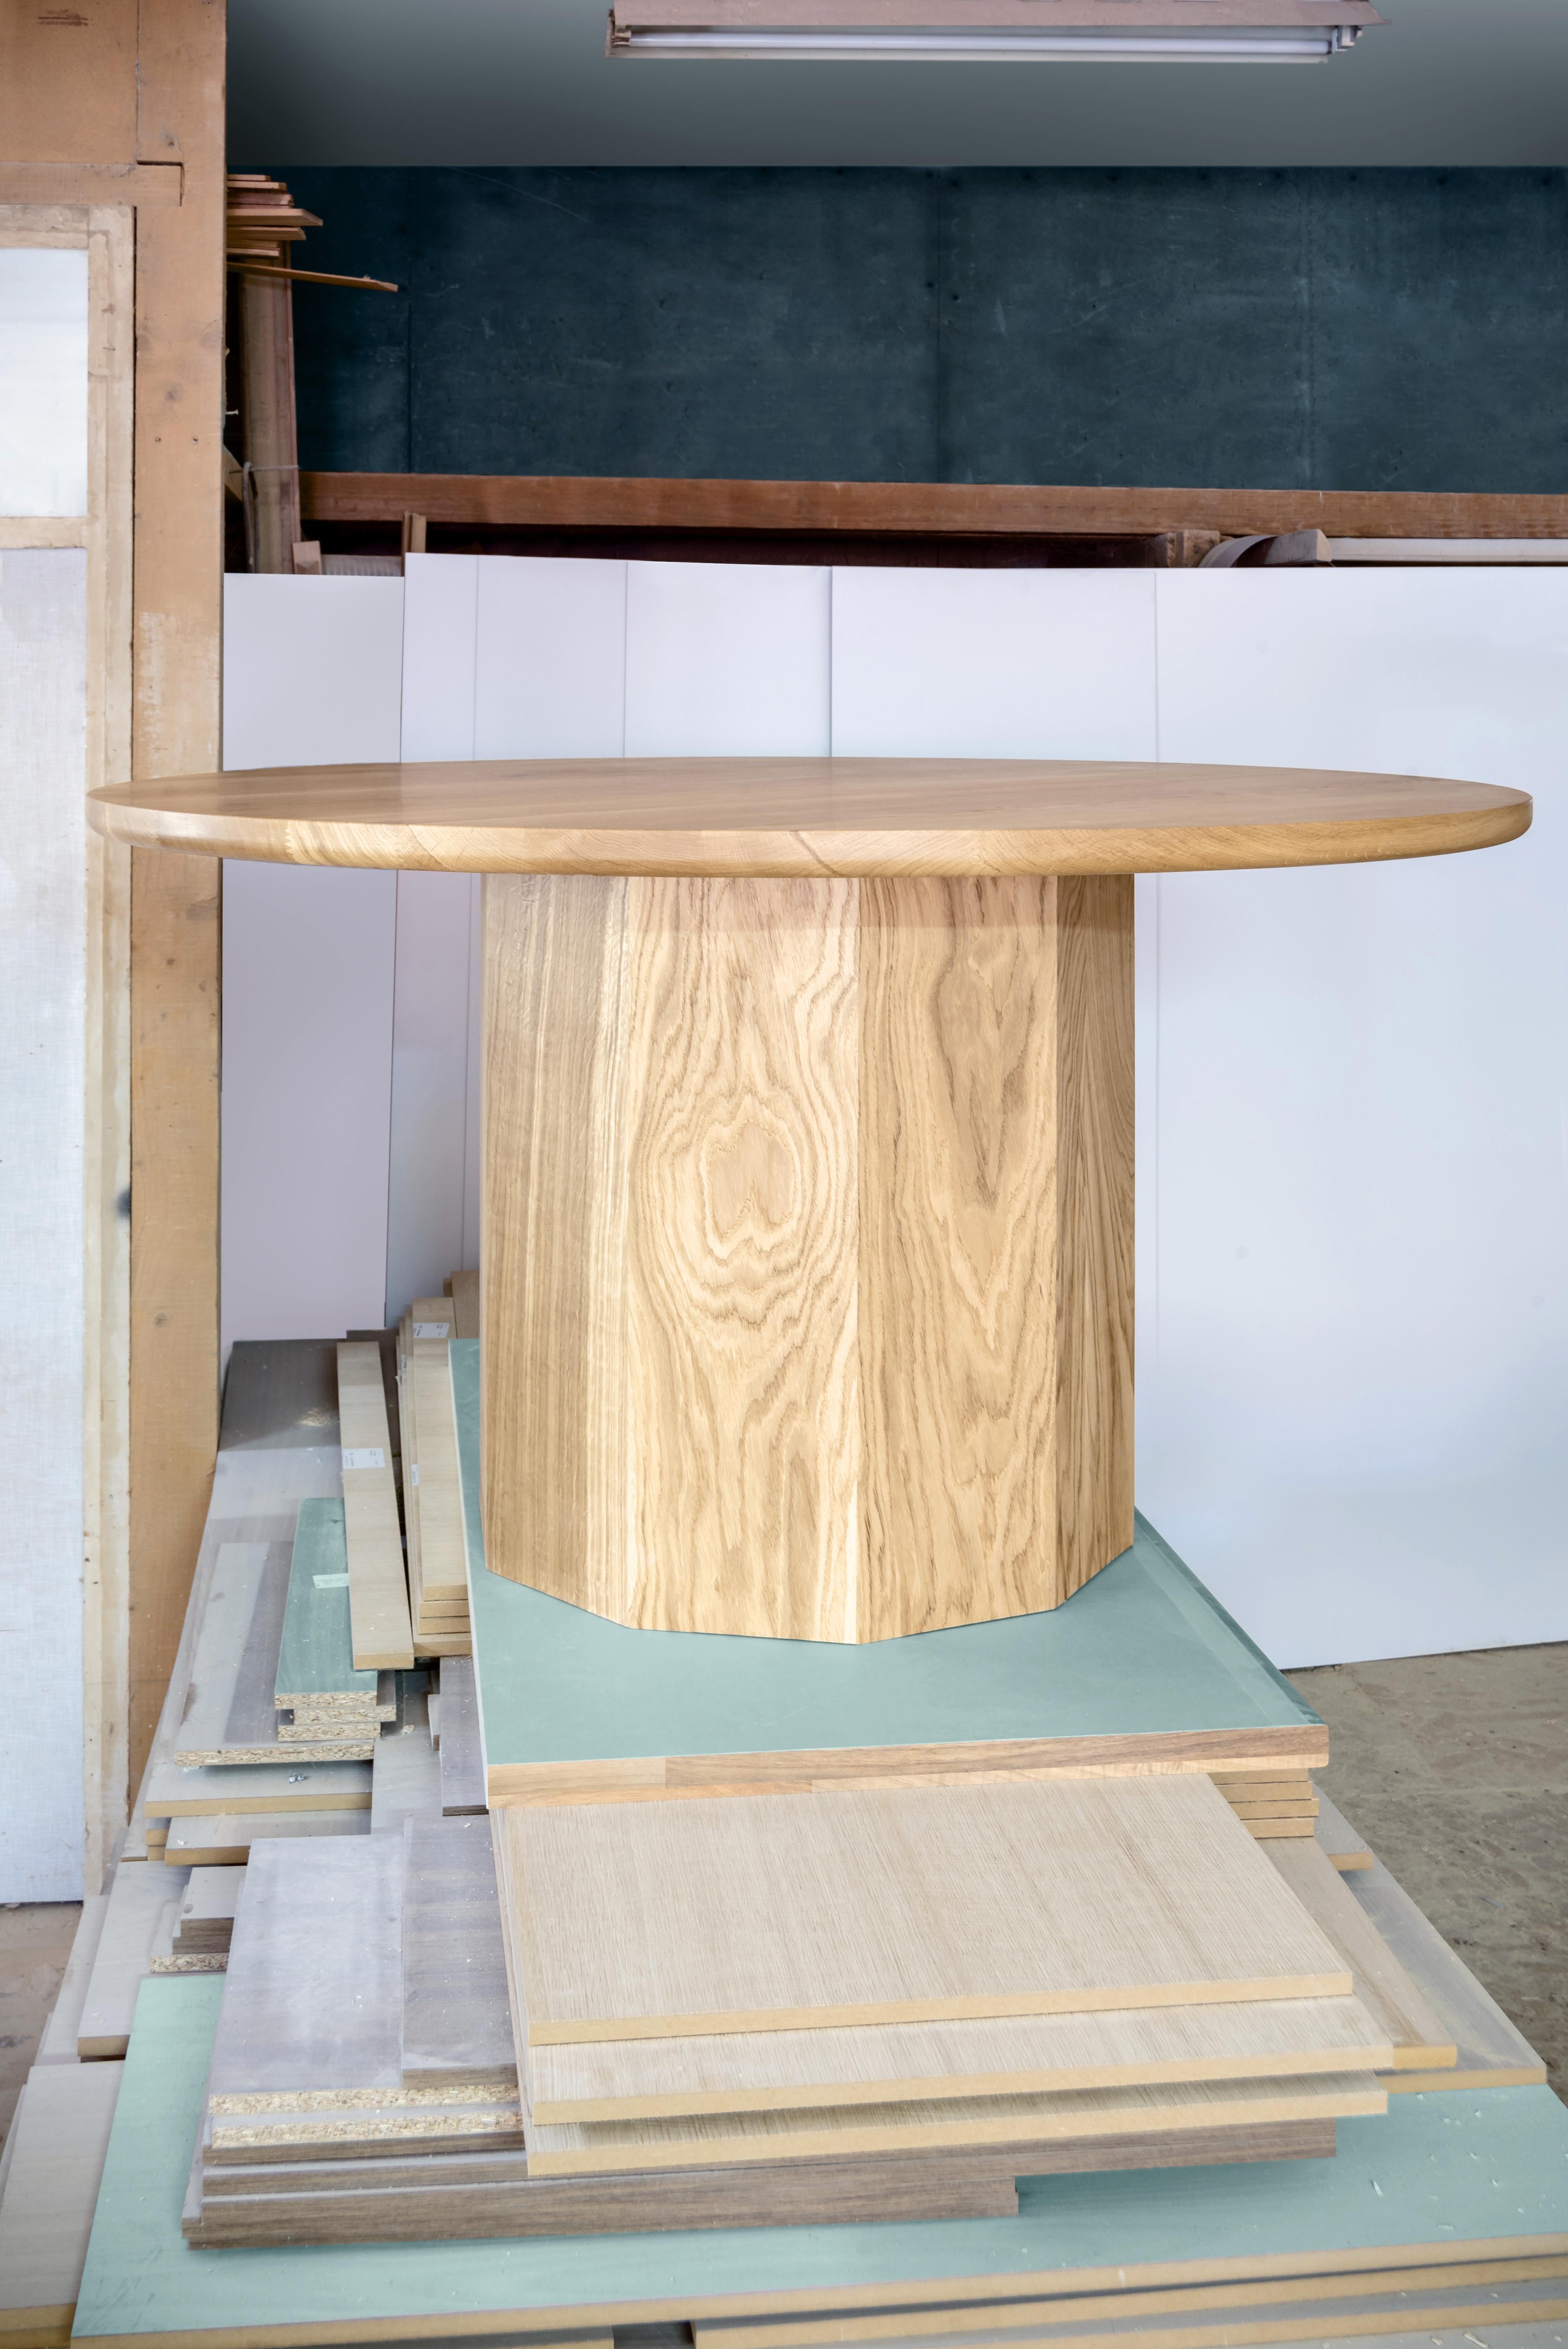 Oak dining table by Daniel Nikolovski
Dimensions: ø 150 x H 80 cm, Base: ø 65 cm
Materials: Massive oak
Also available in walnut.

Handmade from locally sourced oak wood, originating from the south of Macedonia, the OAK Series are defined by a